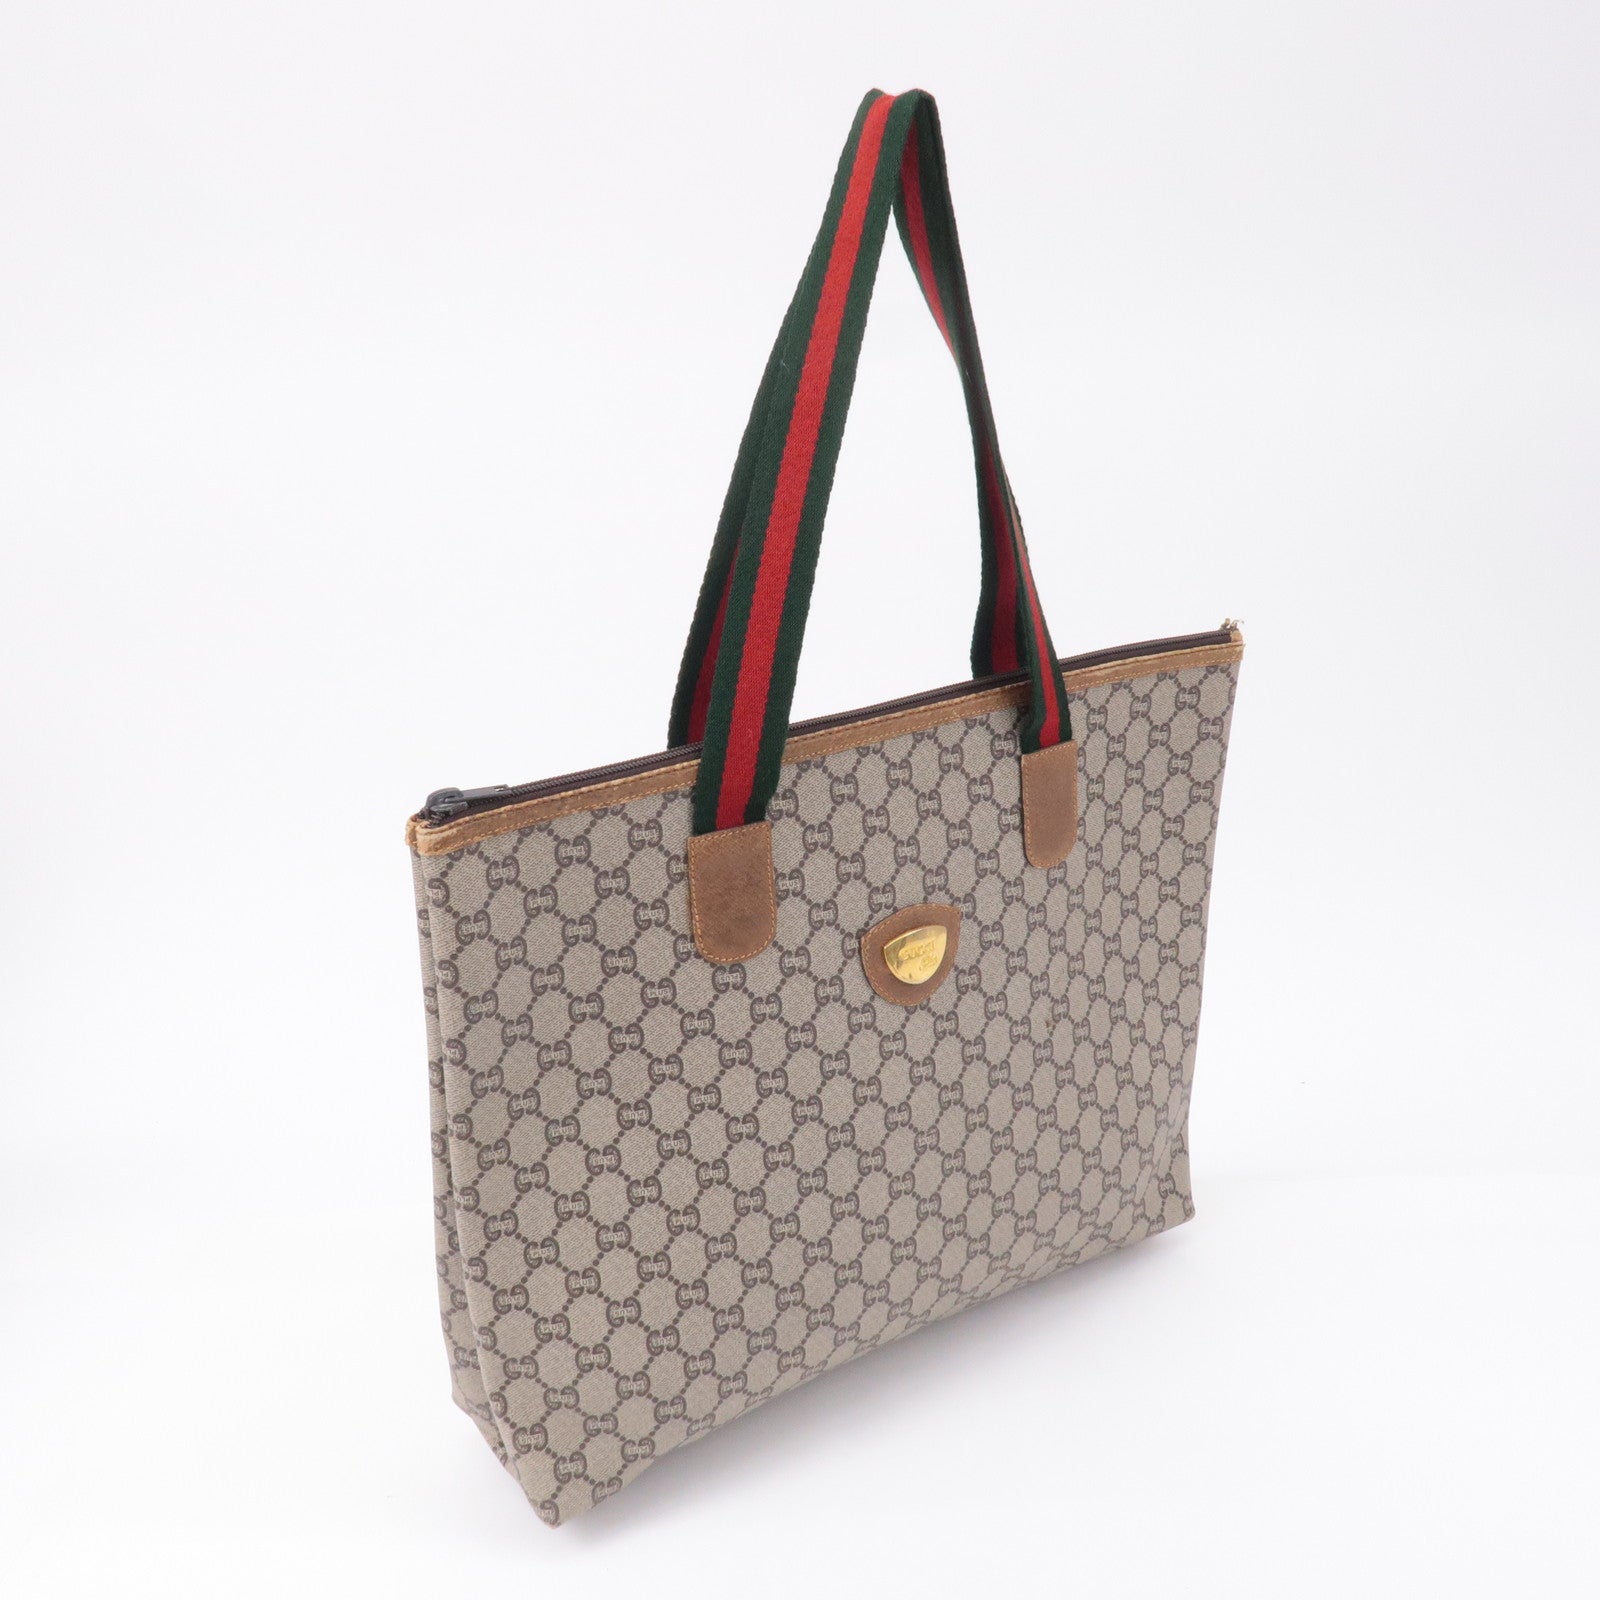 Beige - Old - GUCCI - Sherry - Bag - Plus - Leather - GUCCI - Tote